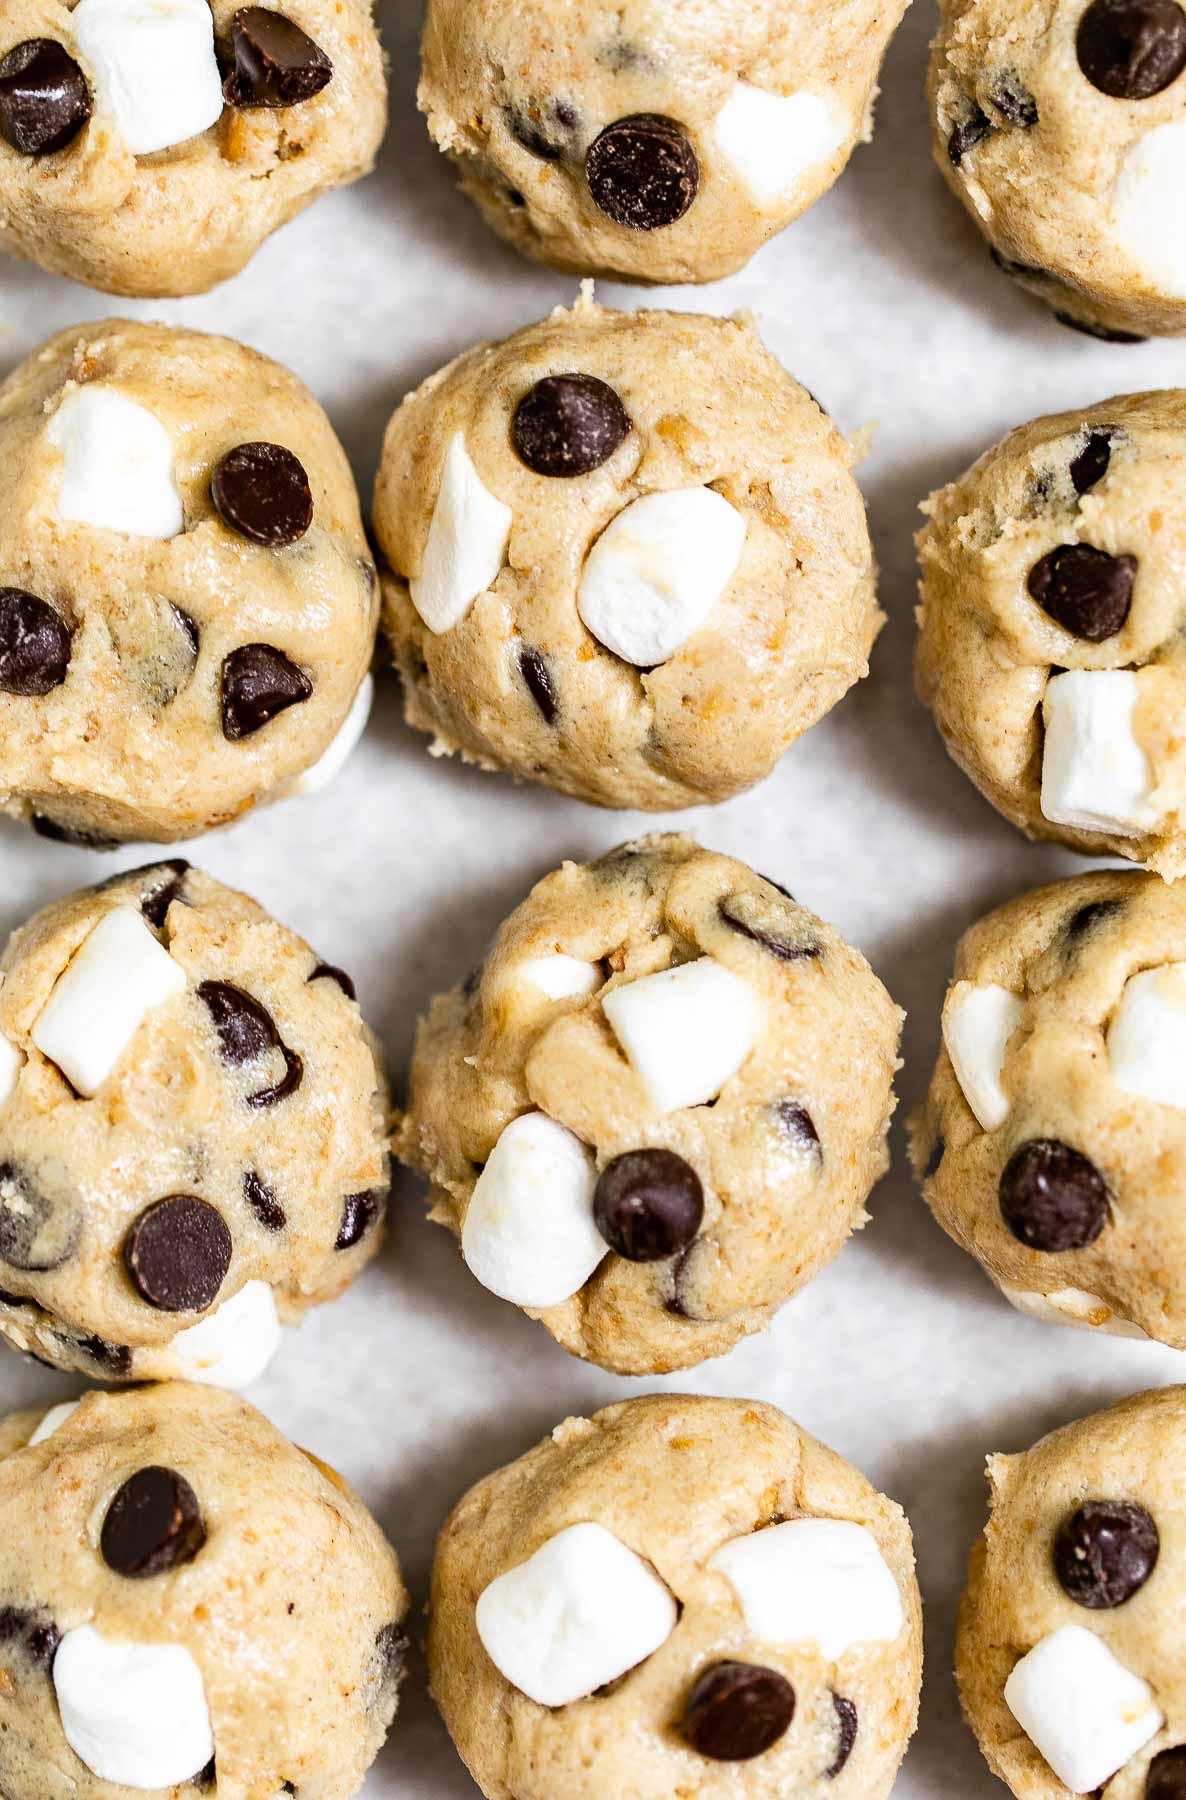 Marshmallow chocolate chip cookie dough rolled into balls.